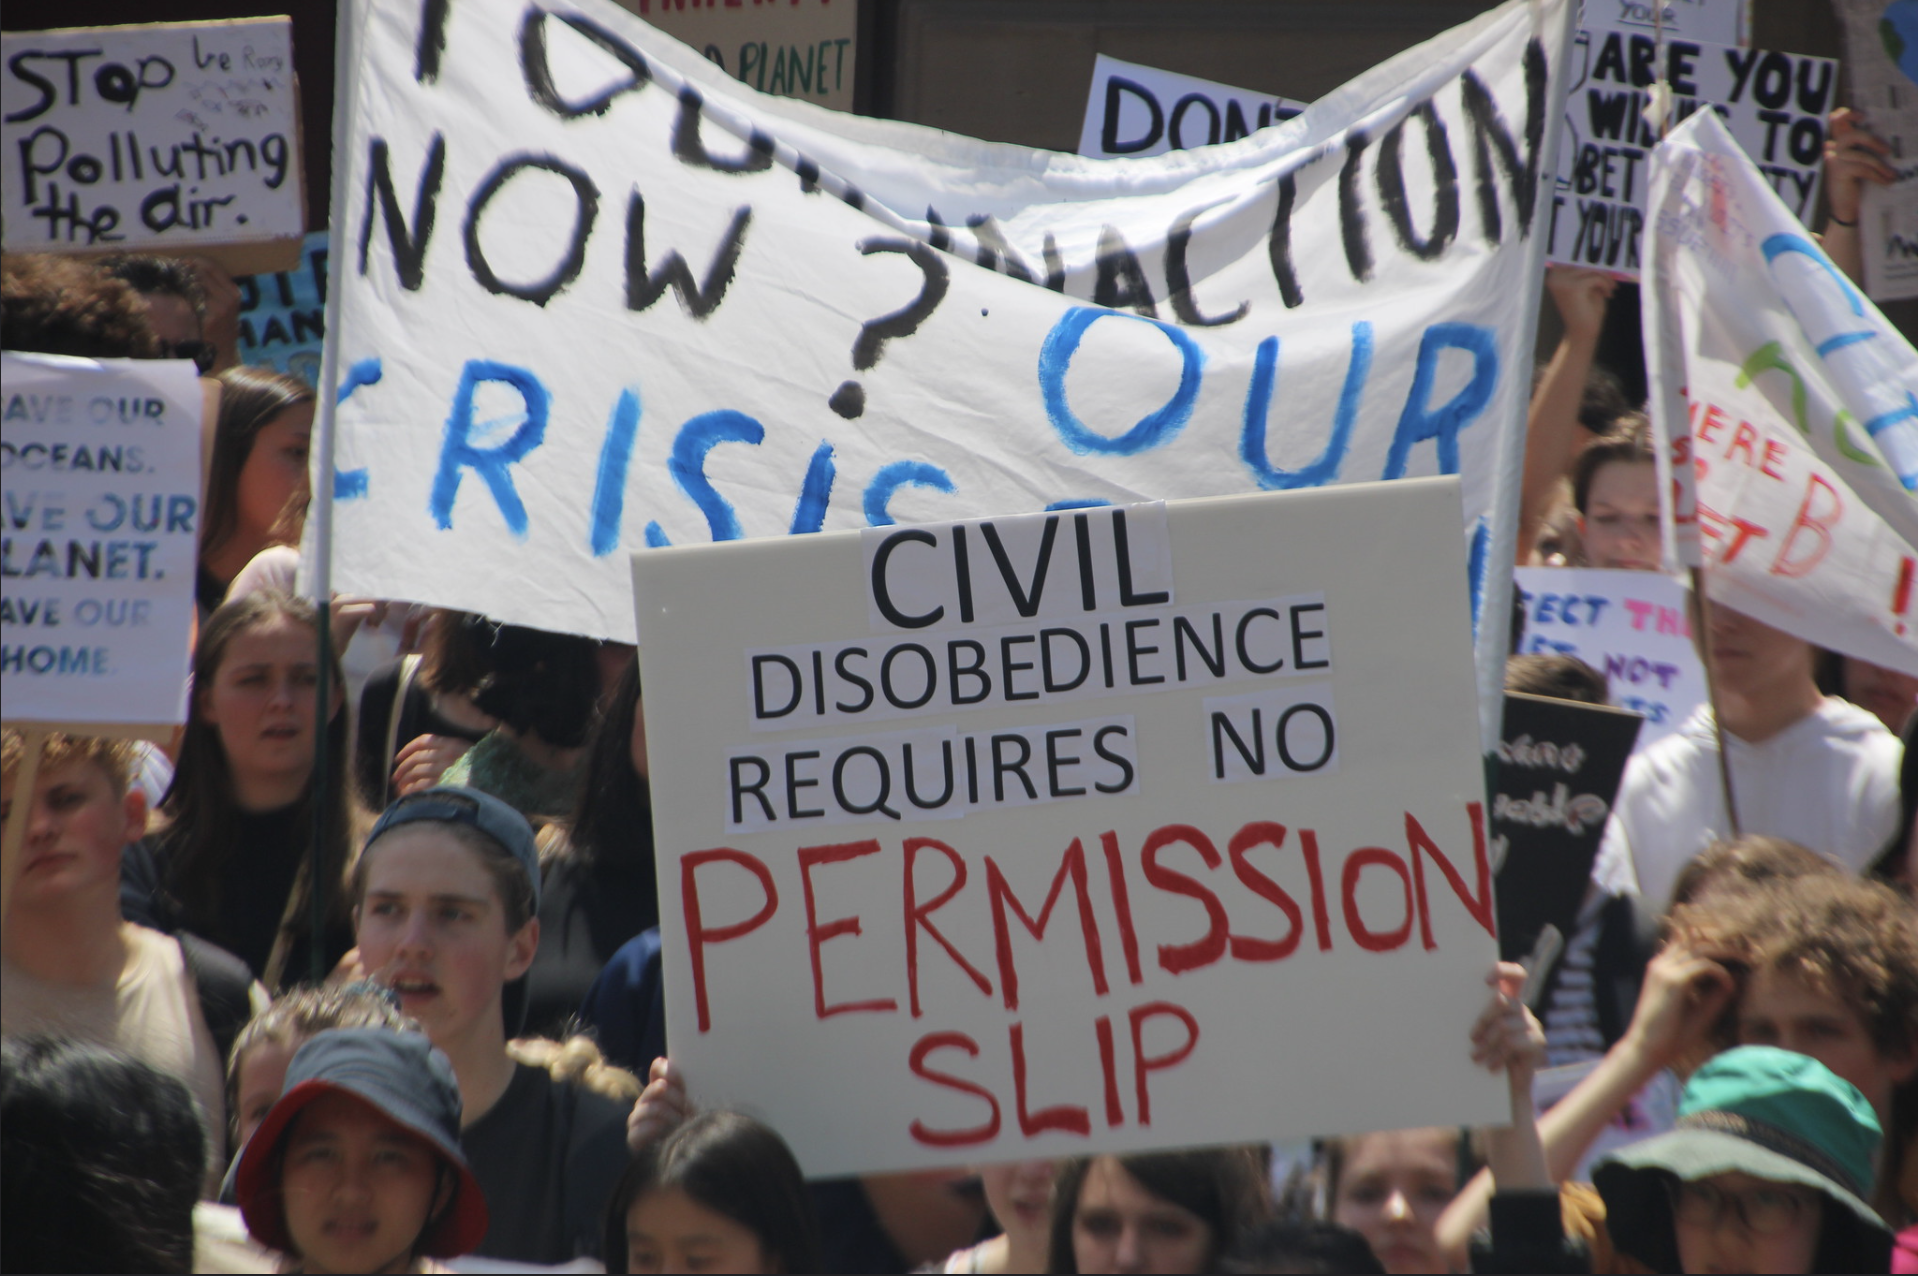 A protest sign that says 'Civil disobedience requires no permission slip'.